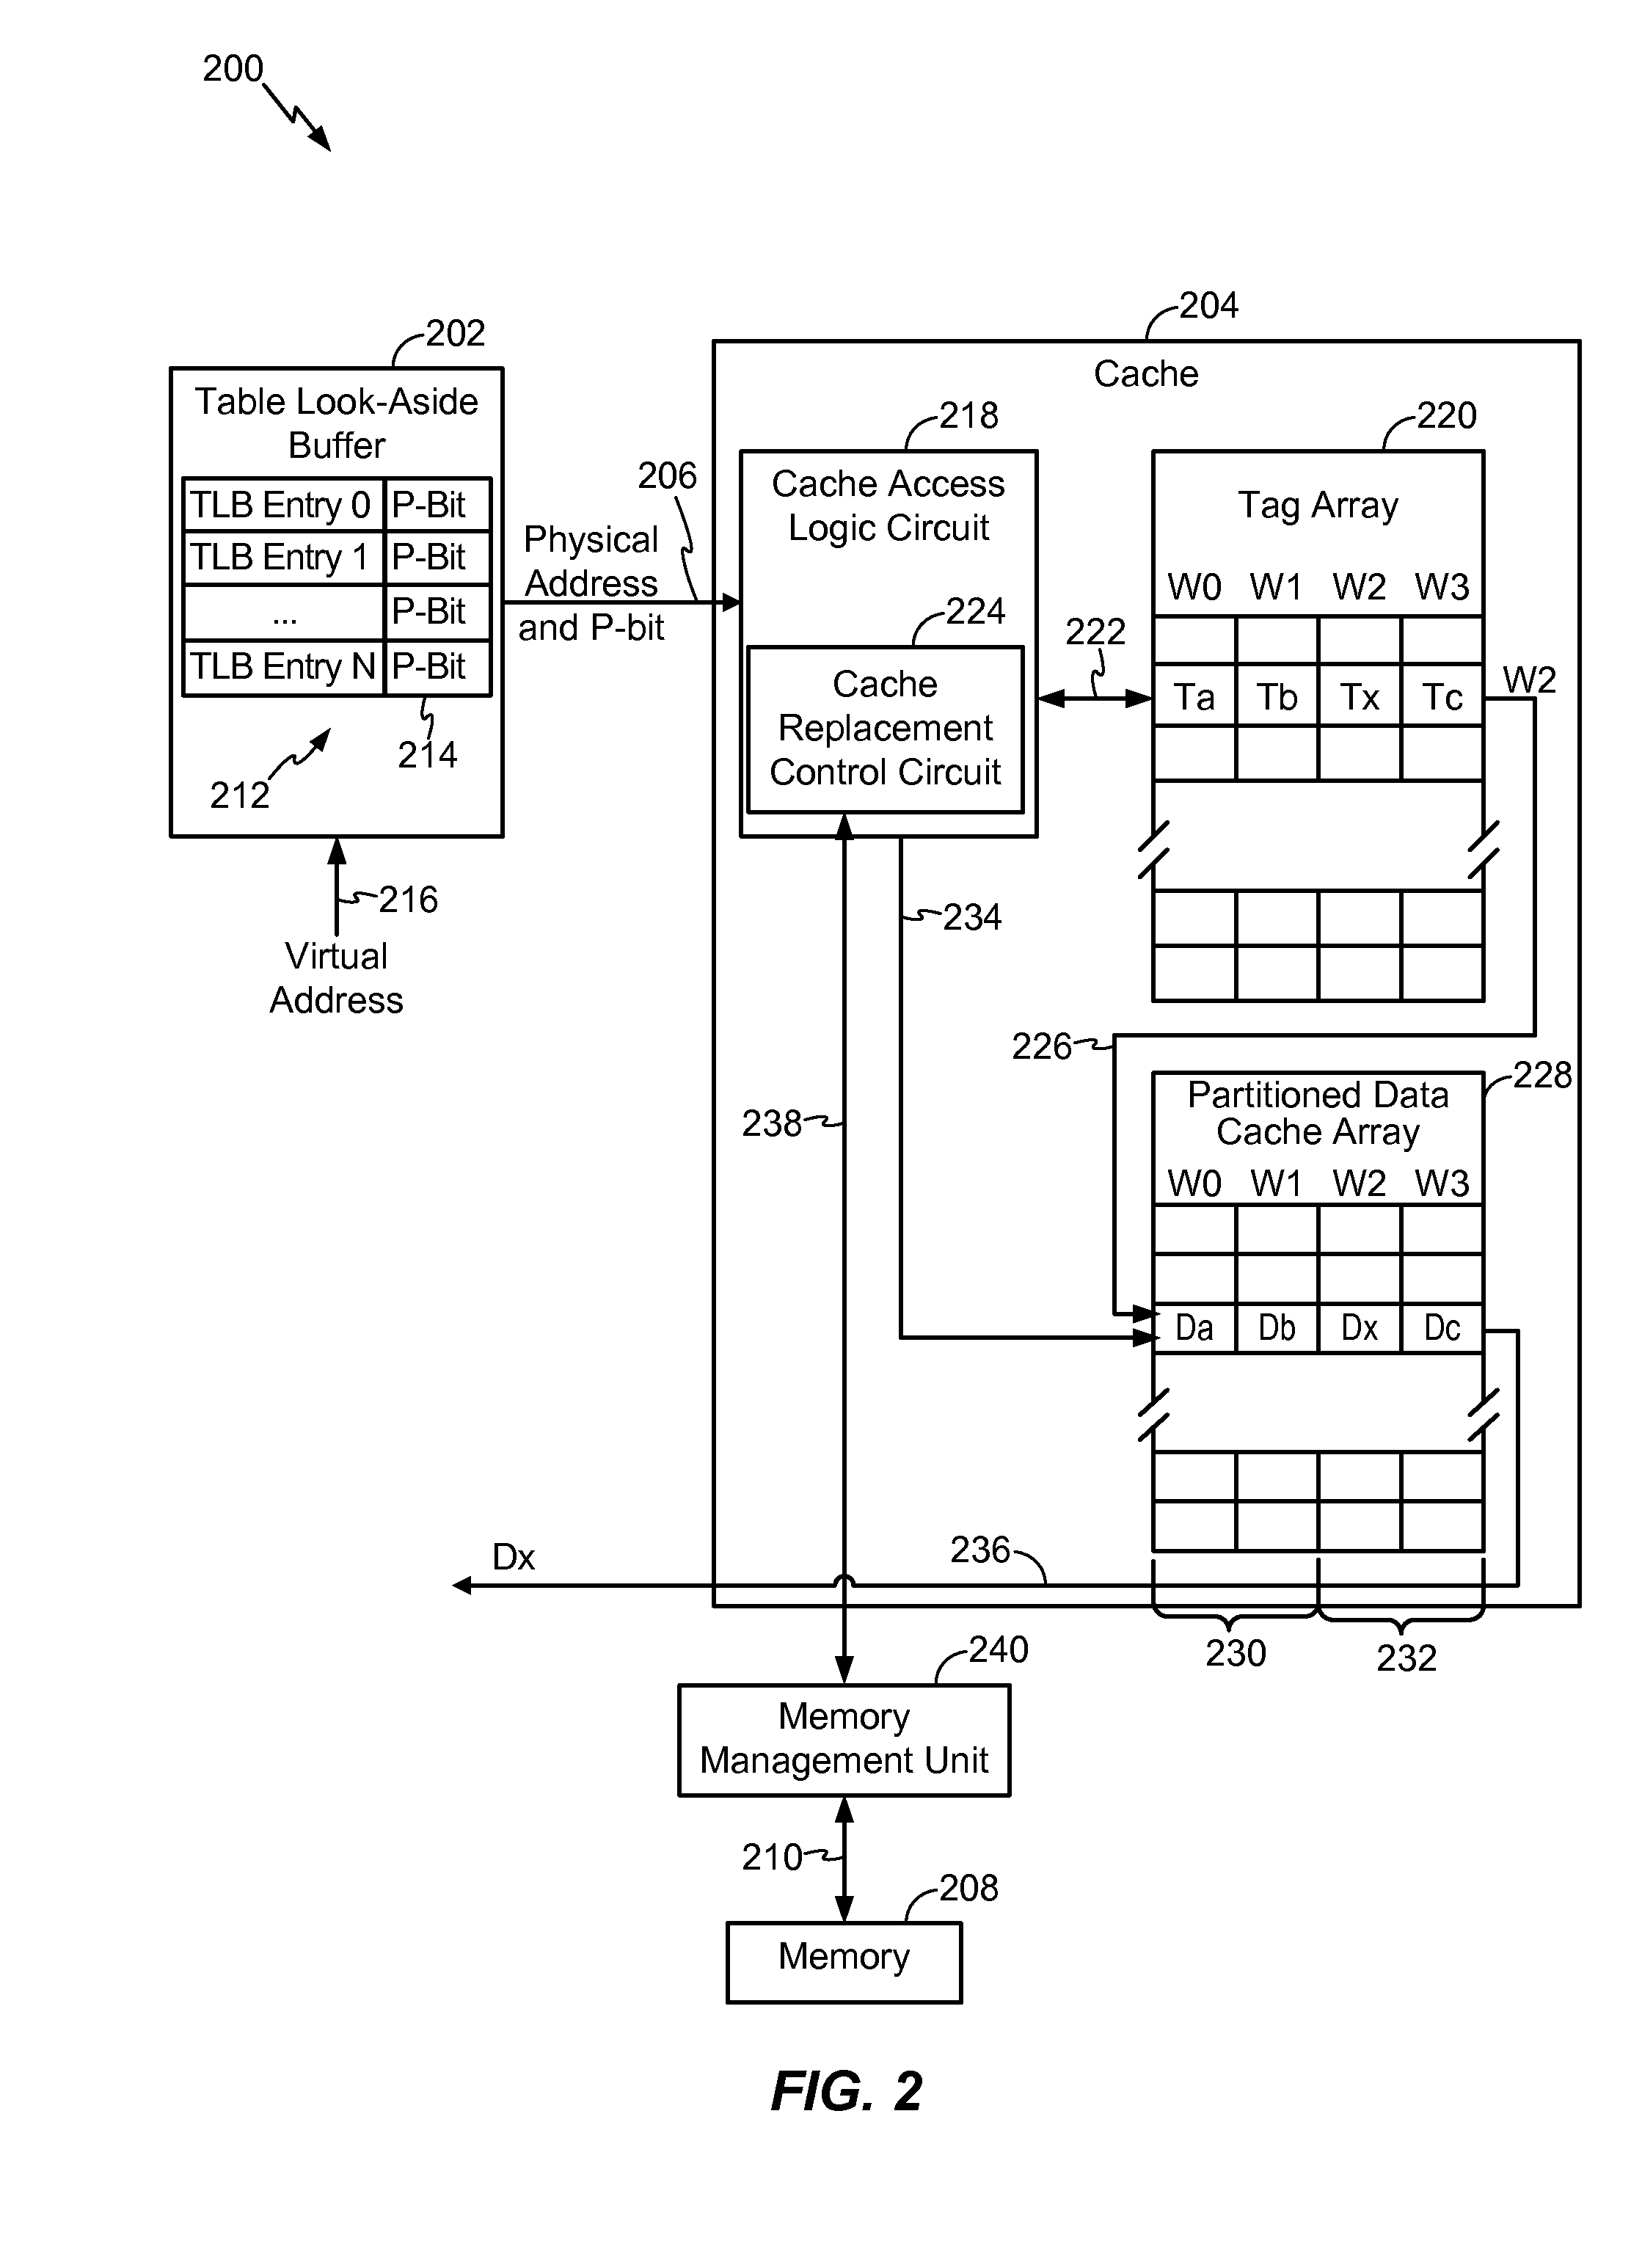 Partitioned Replacement For Cache Memory